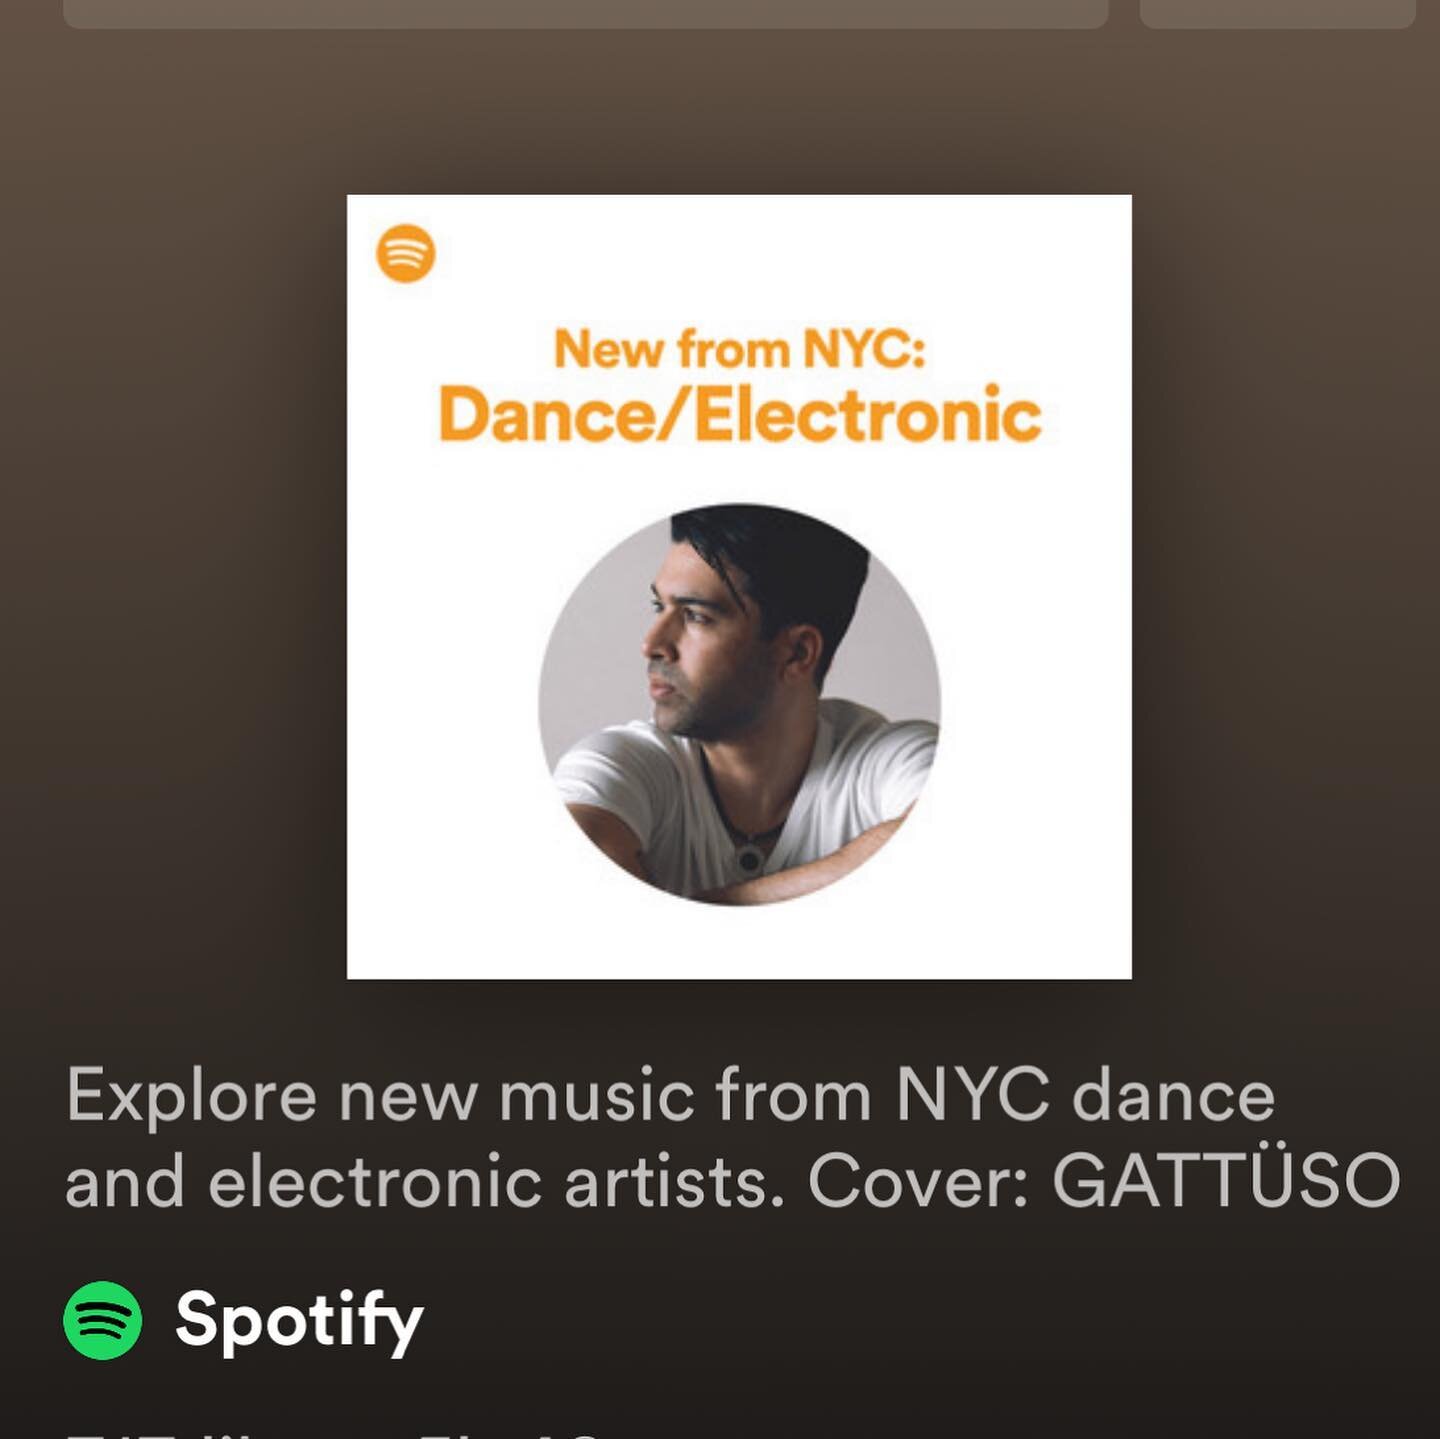 56k streams and counting!! Cut the Cord @husks___ is featured on an official @Spotify editorial playlist: New from NYC | Dance/Electronic . Thanks for your support! 💋💋💋💋